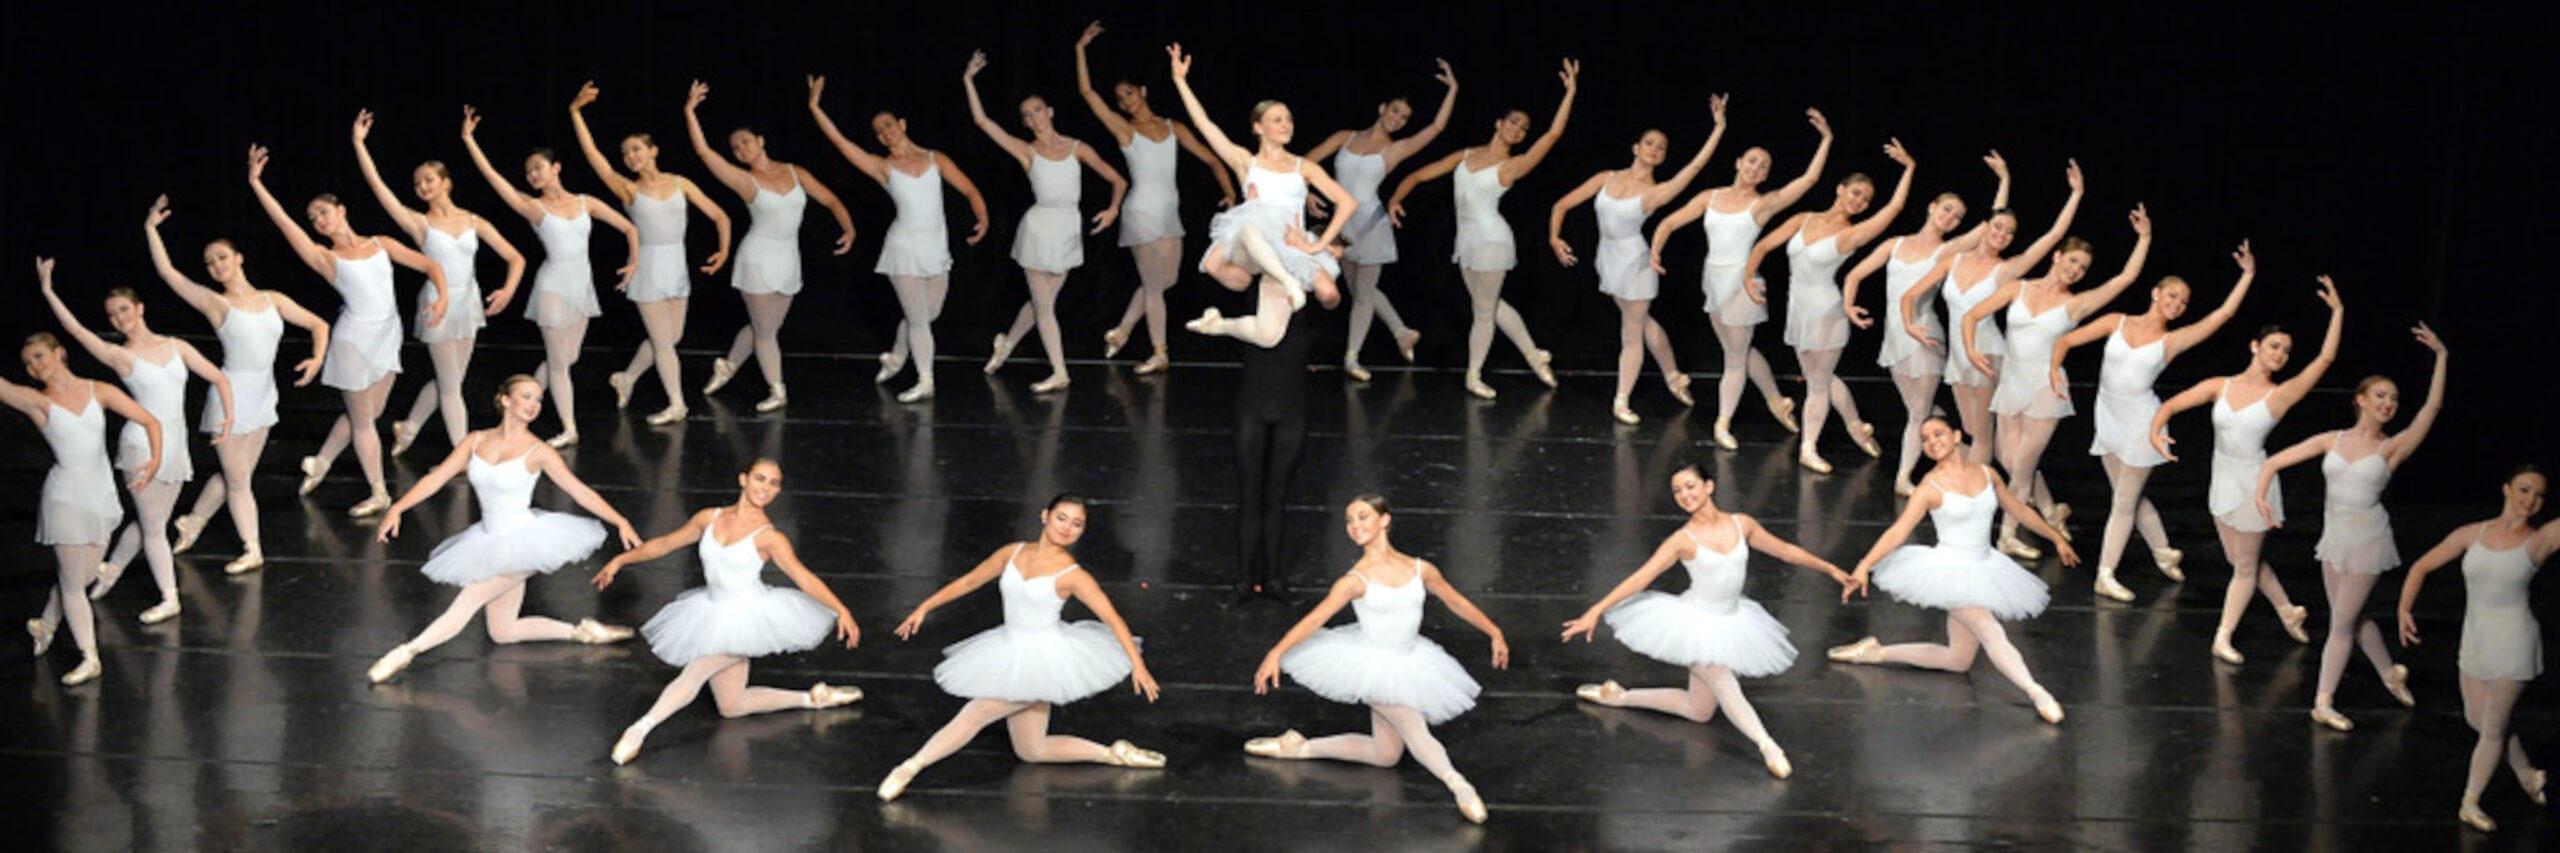 Summer Intensive performers on stage